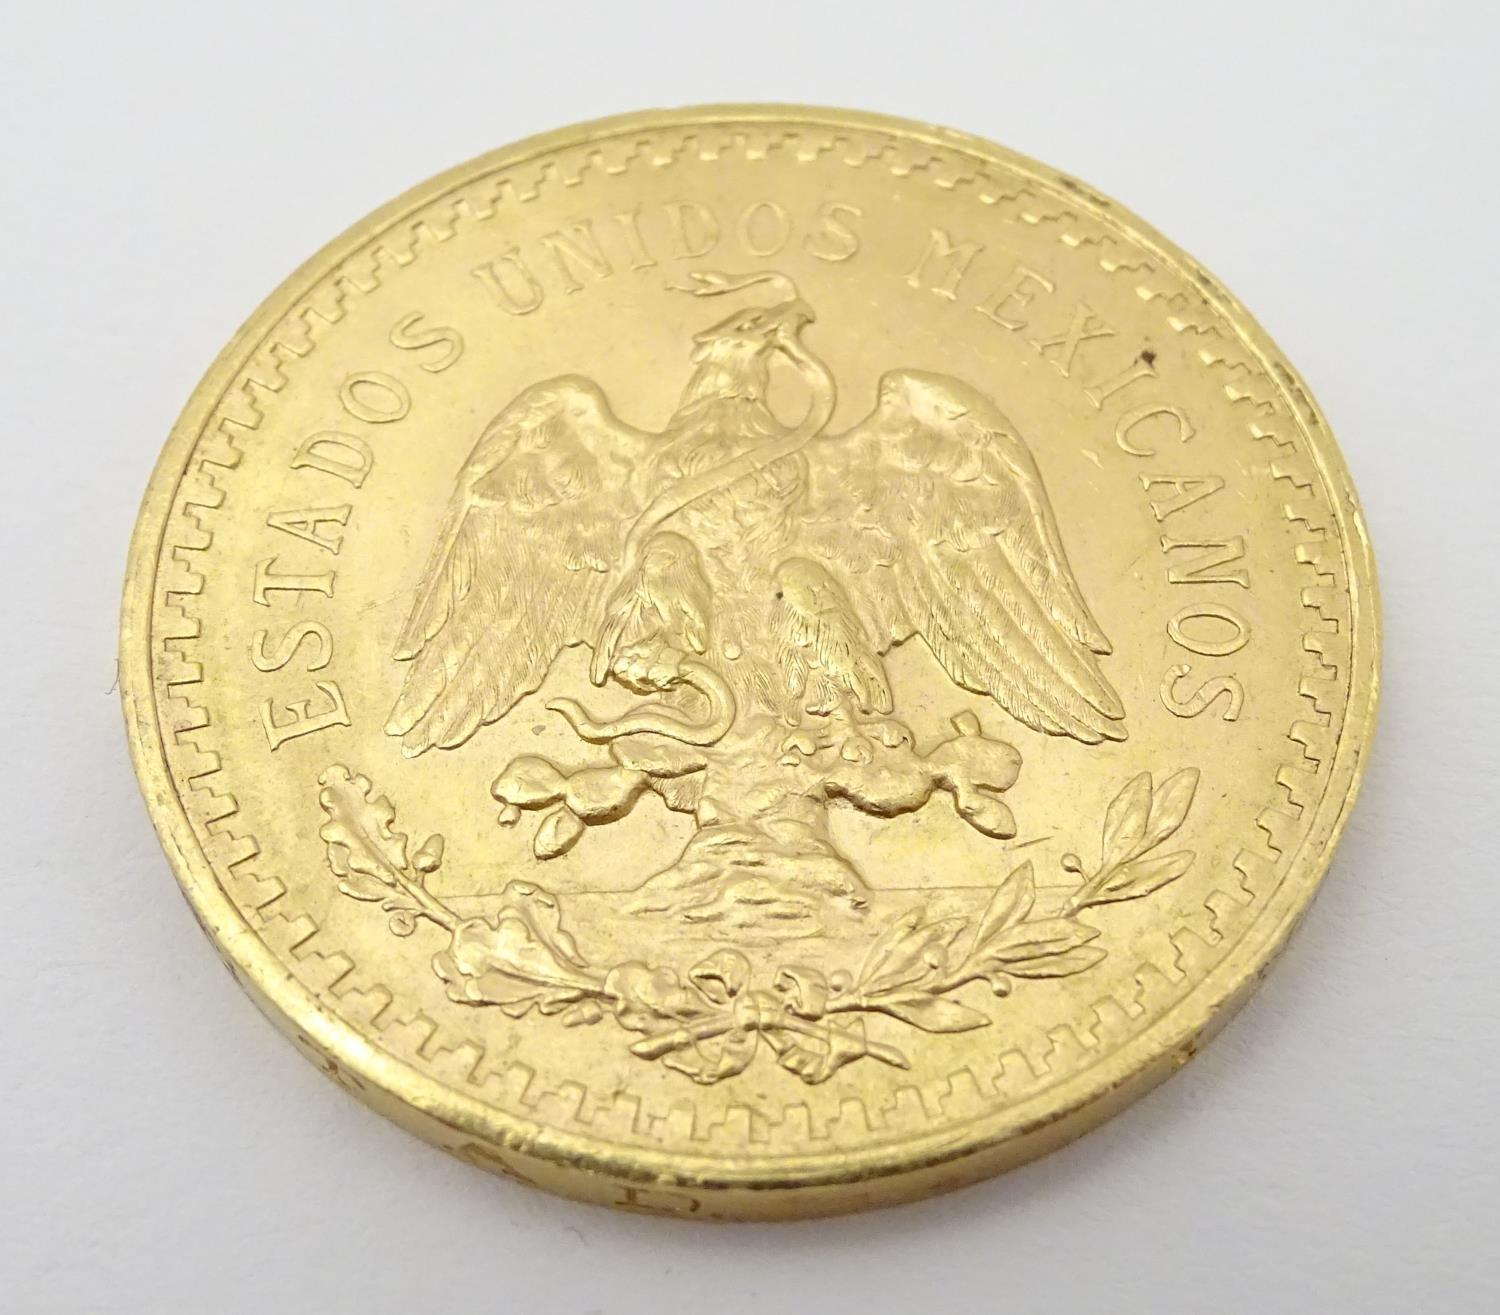 A 1943 gold 50 pesos coin commemorating Mexico's 100th anniversary of independence from Spain. The - Image 6 of 10